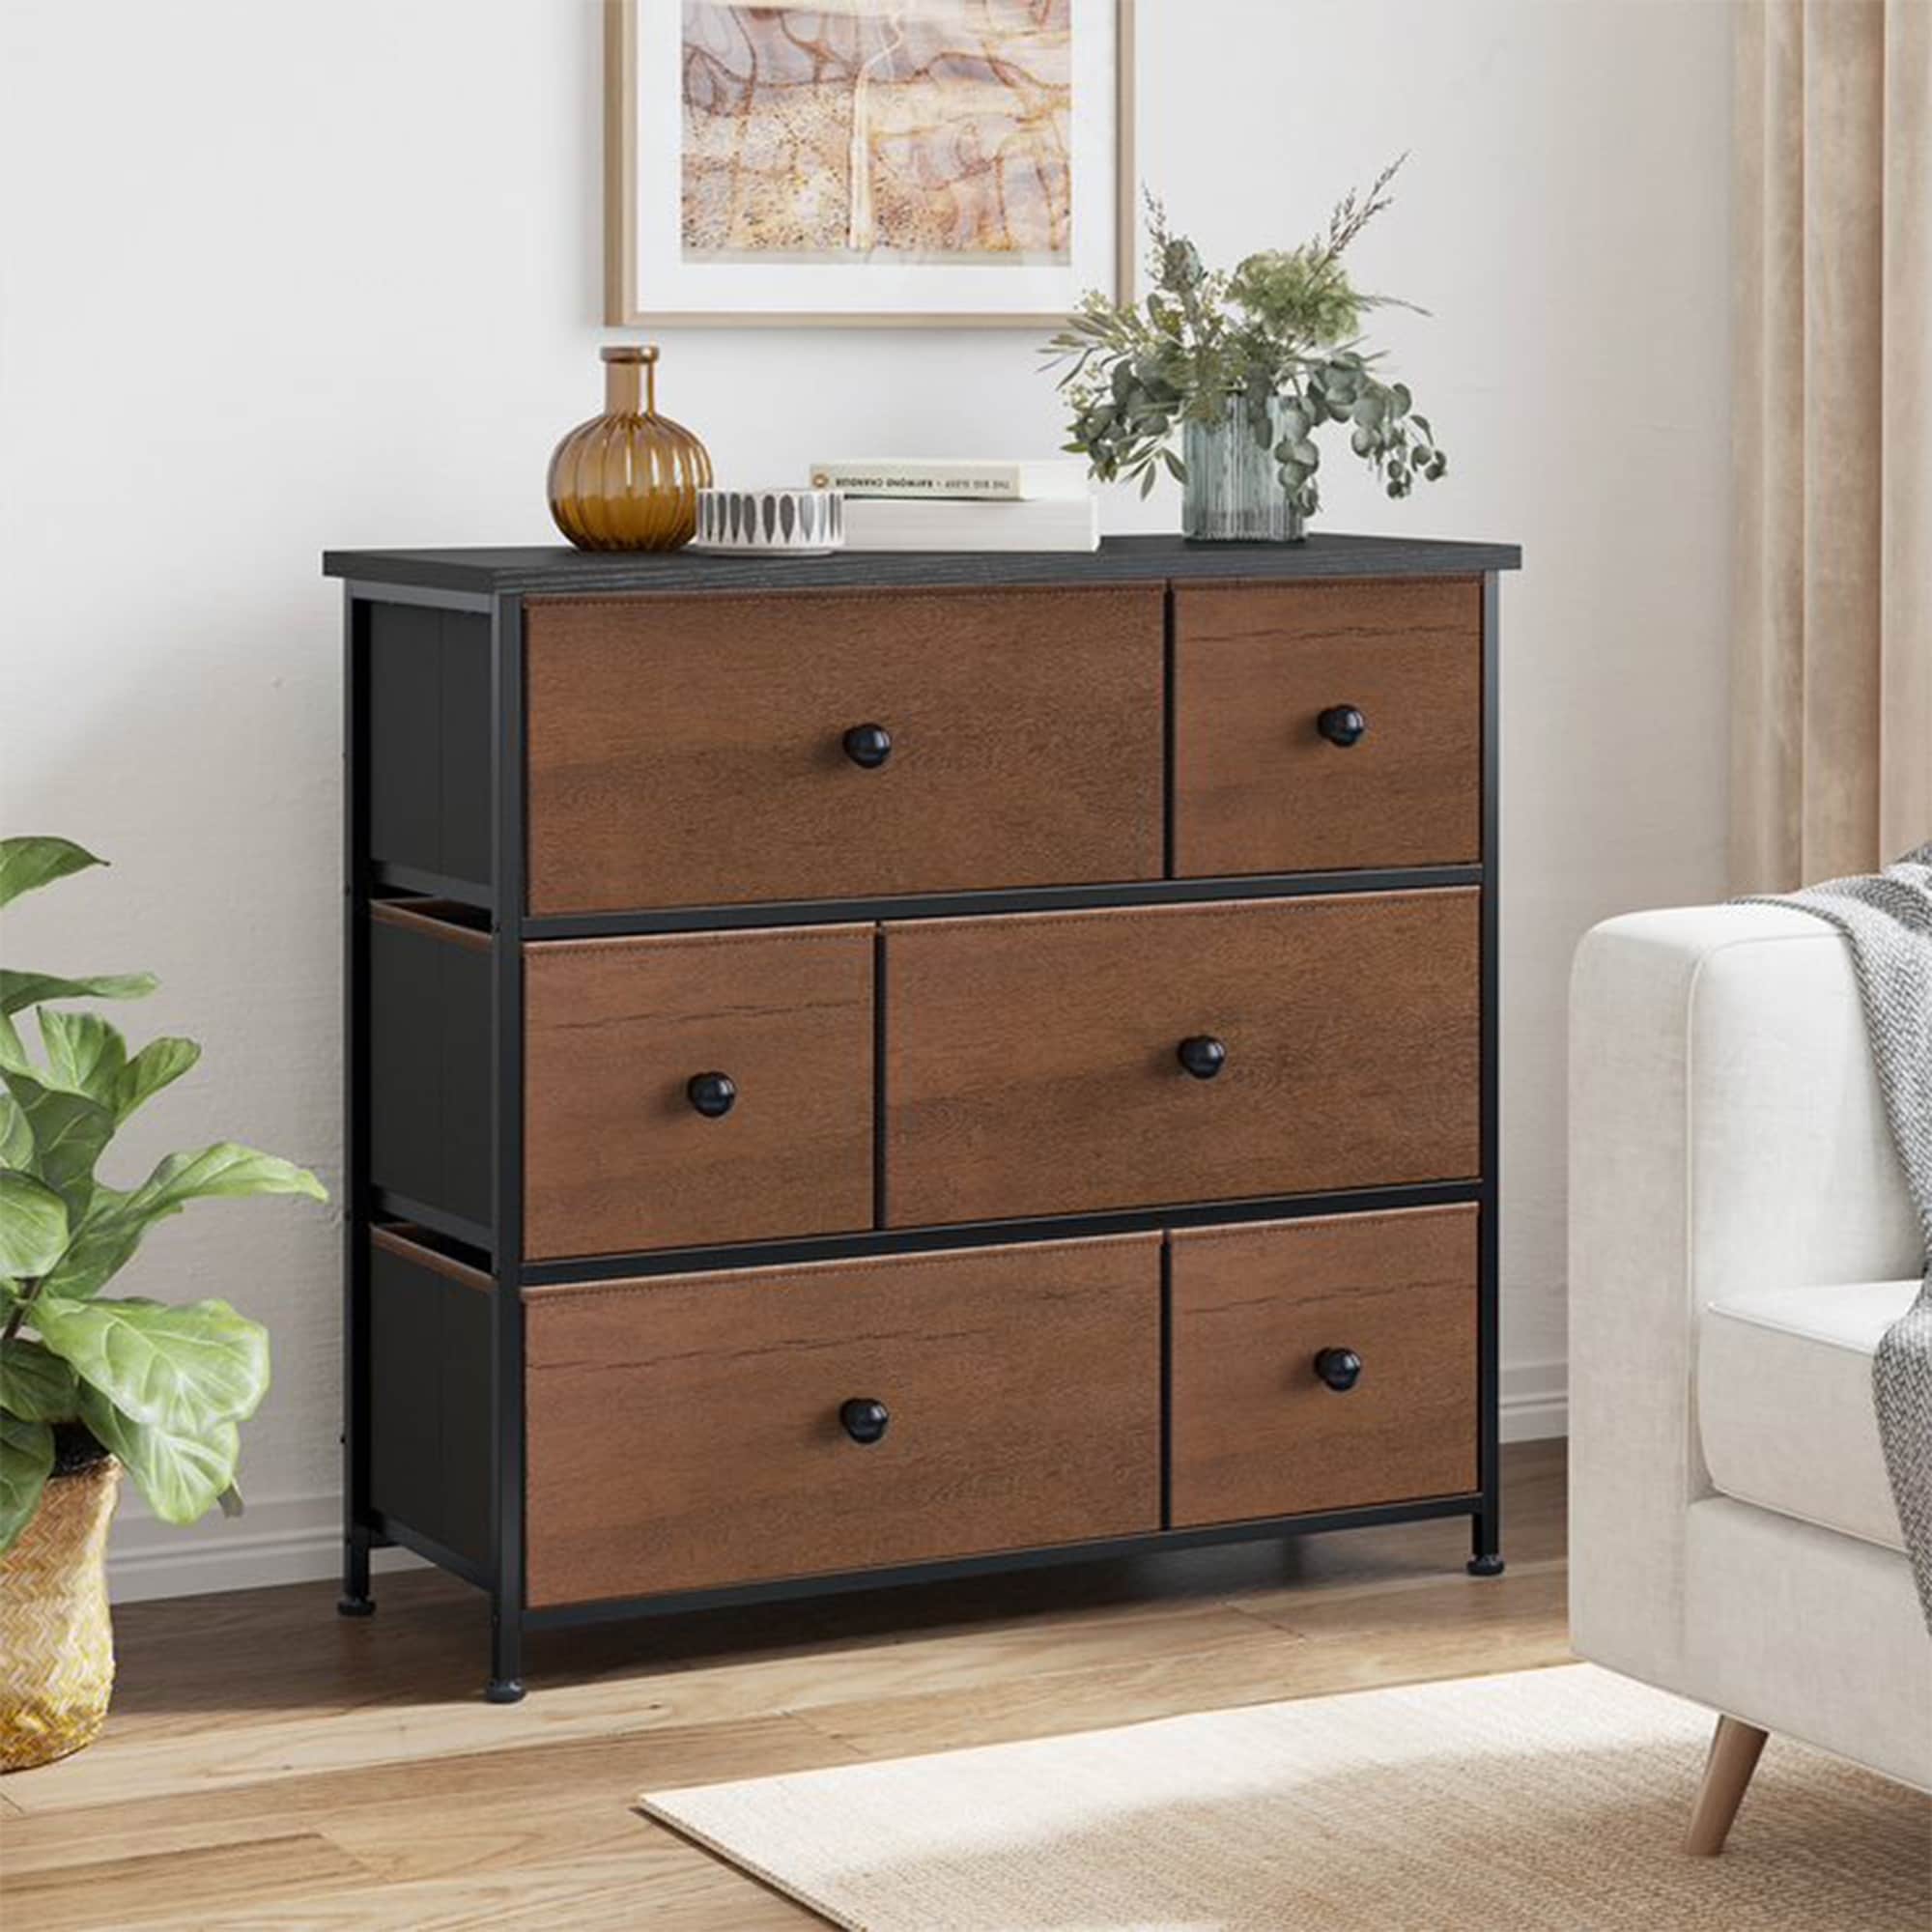 https://ak1.ostkcdn.com/images/products/is/images/direct/2642b6ee4c287a00f945ae6576d1f009ada24e11/REAHOME-6-Drawer-Dresser-Organization-Storage-Unit-with-Steel-Frame%2C-Espresso.jpg